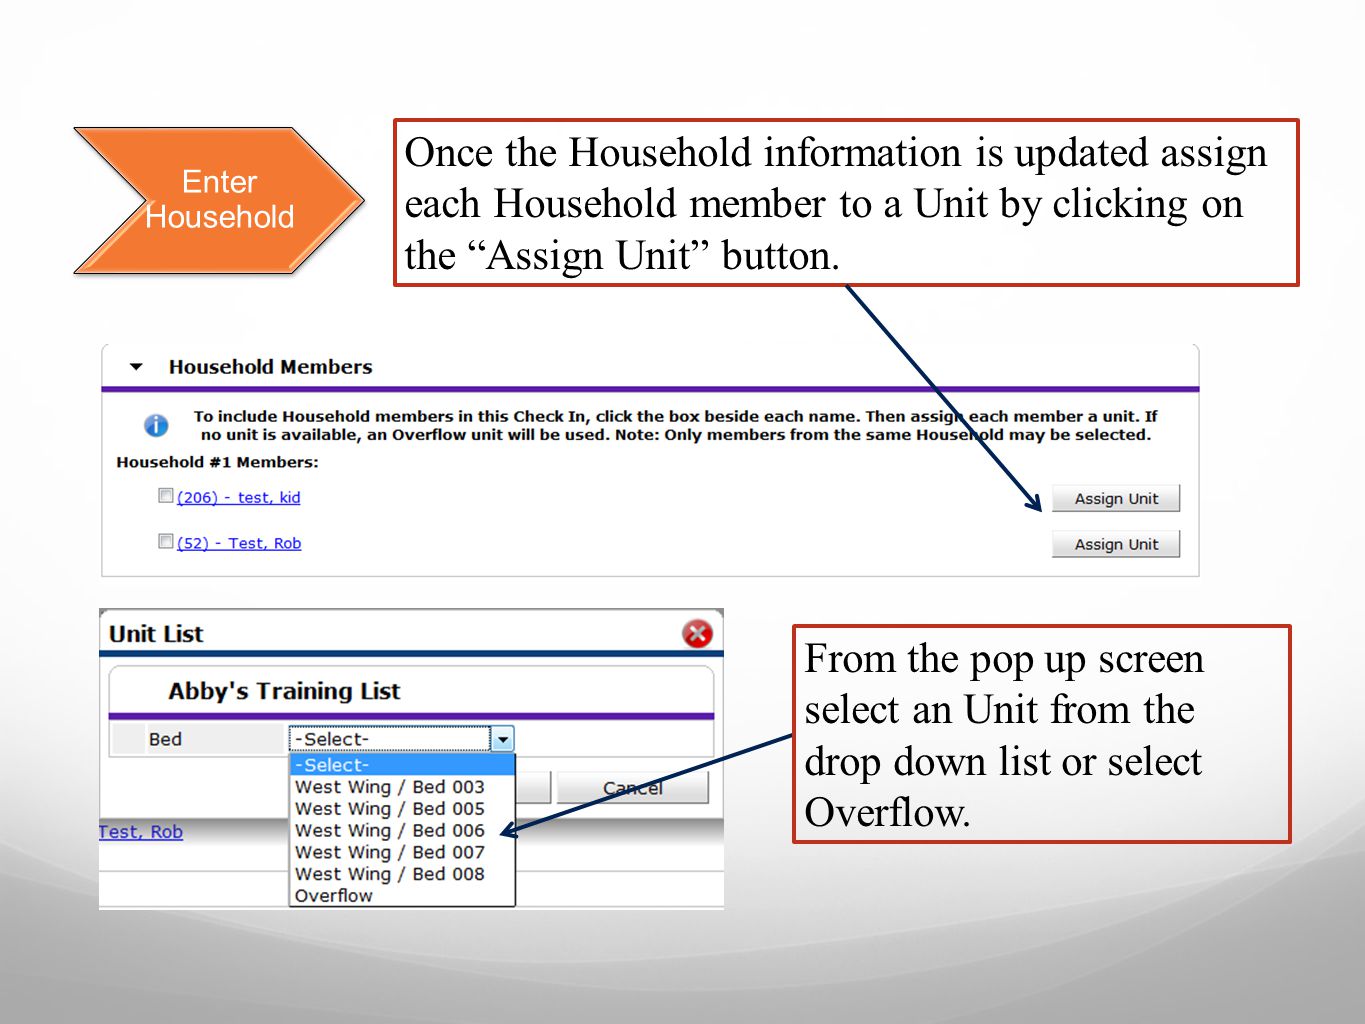 Enter Household Once the Household information is updated assign each Household member to a Unit by clicking on the Assign Unit button.